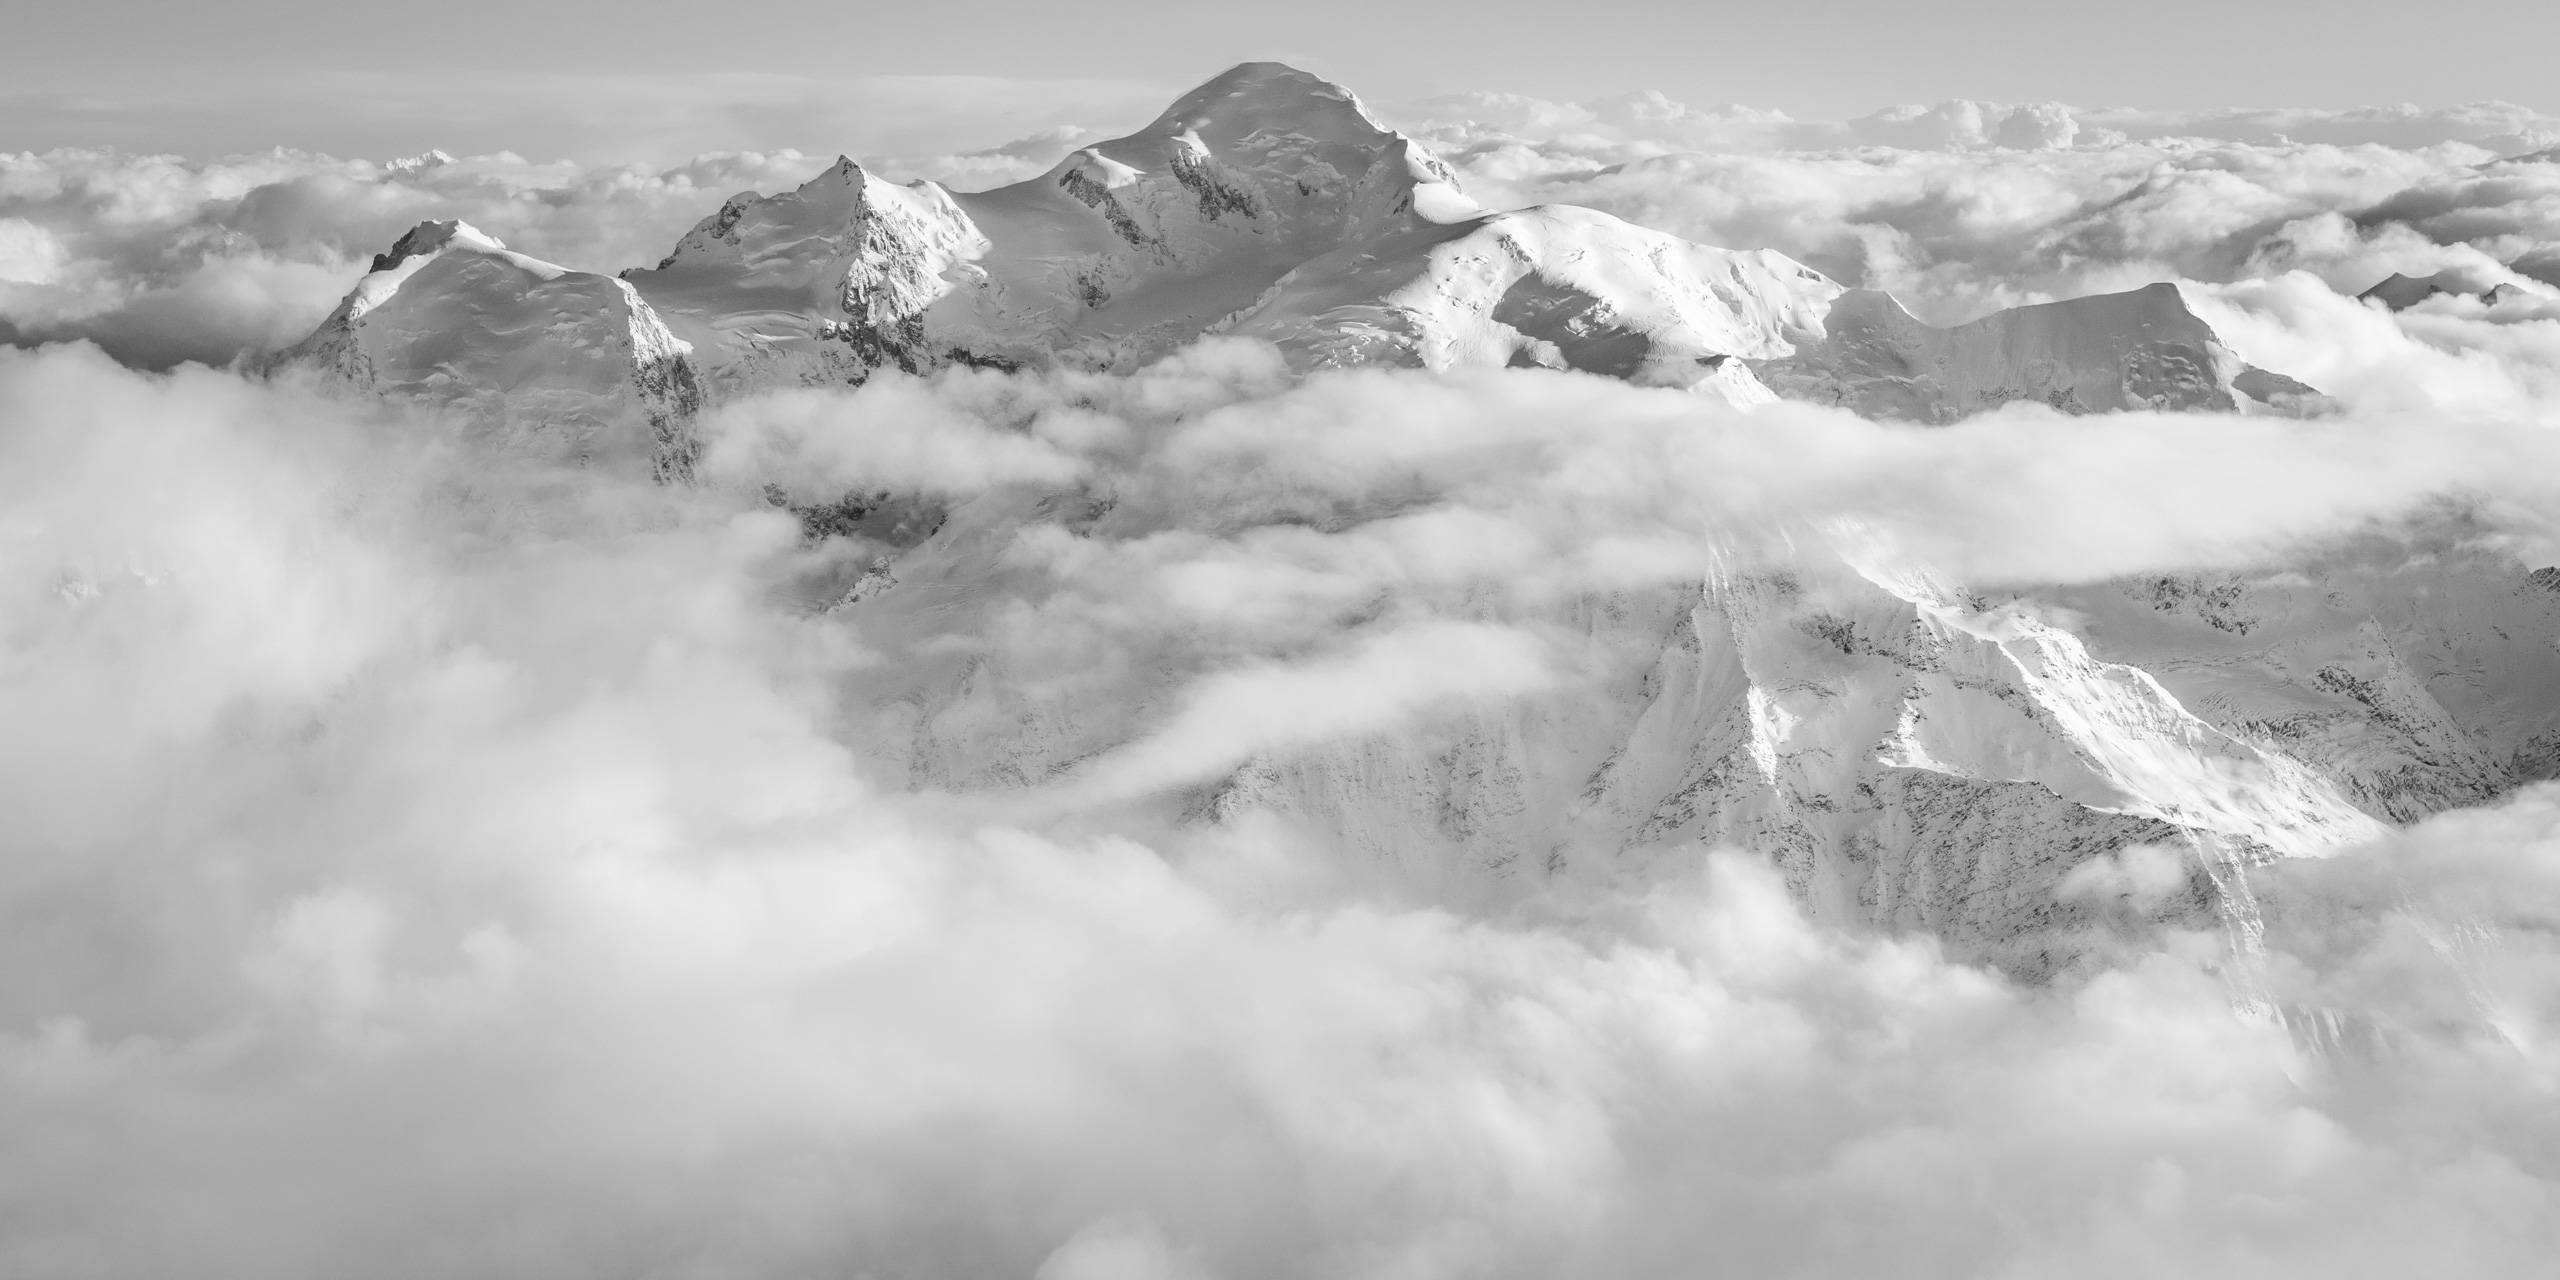 Mont blanc panorama  - Swiss mountains and mont blanc massif panorama in black and white